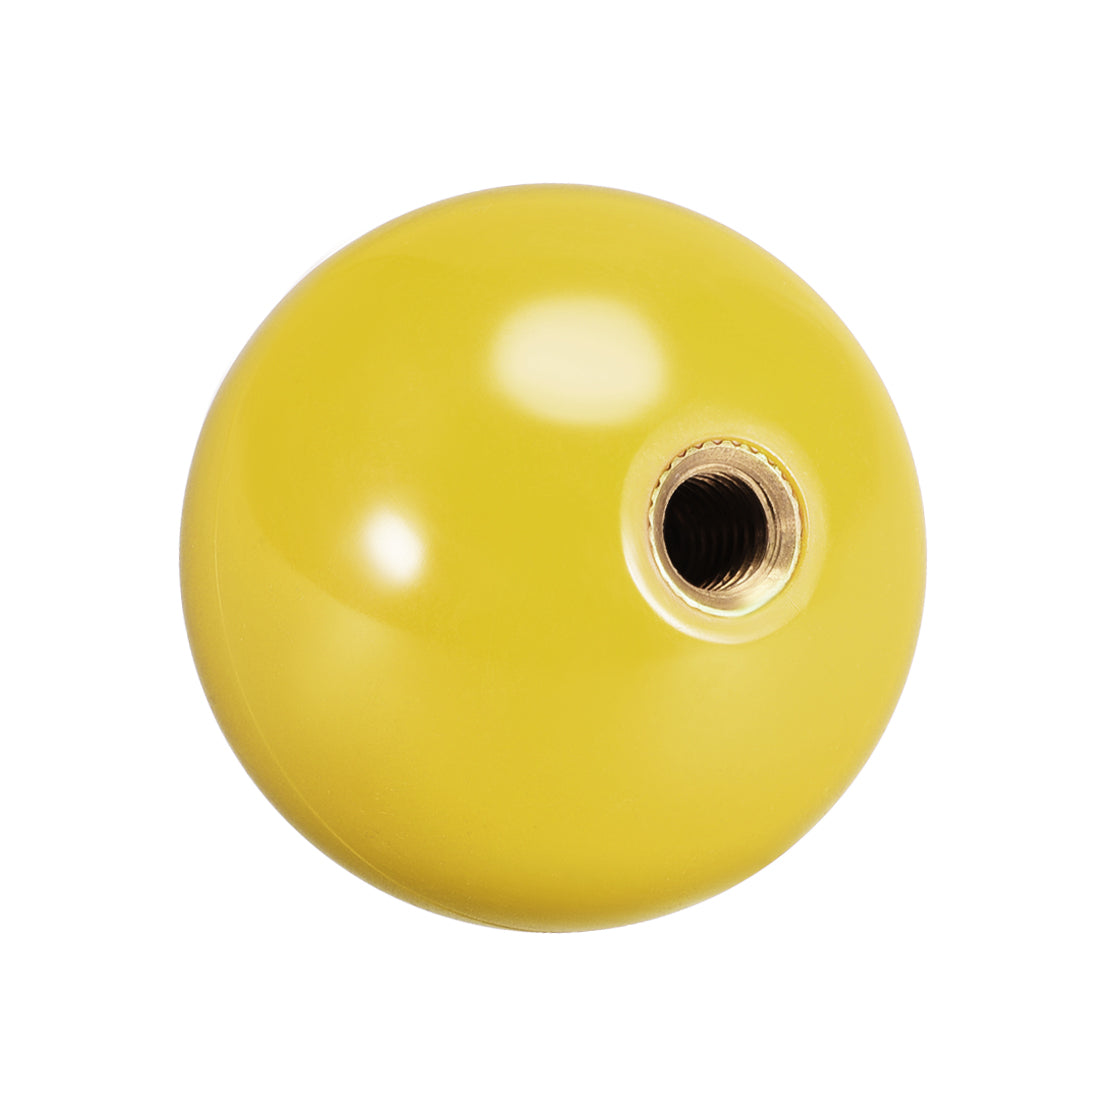 uxcell Uxcell Joystick Ball Top Handle Rocker Round Head Arcade Fighting Game DIY Parts Replacement Yellow